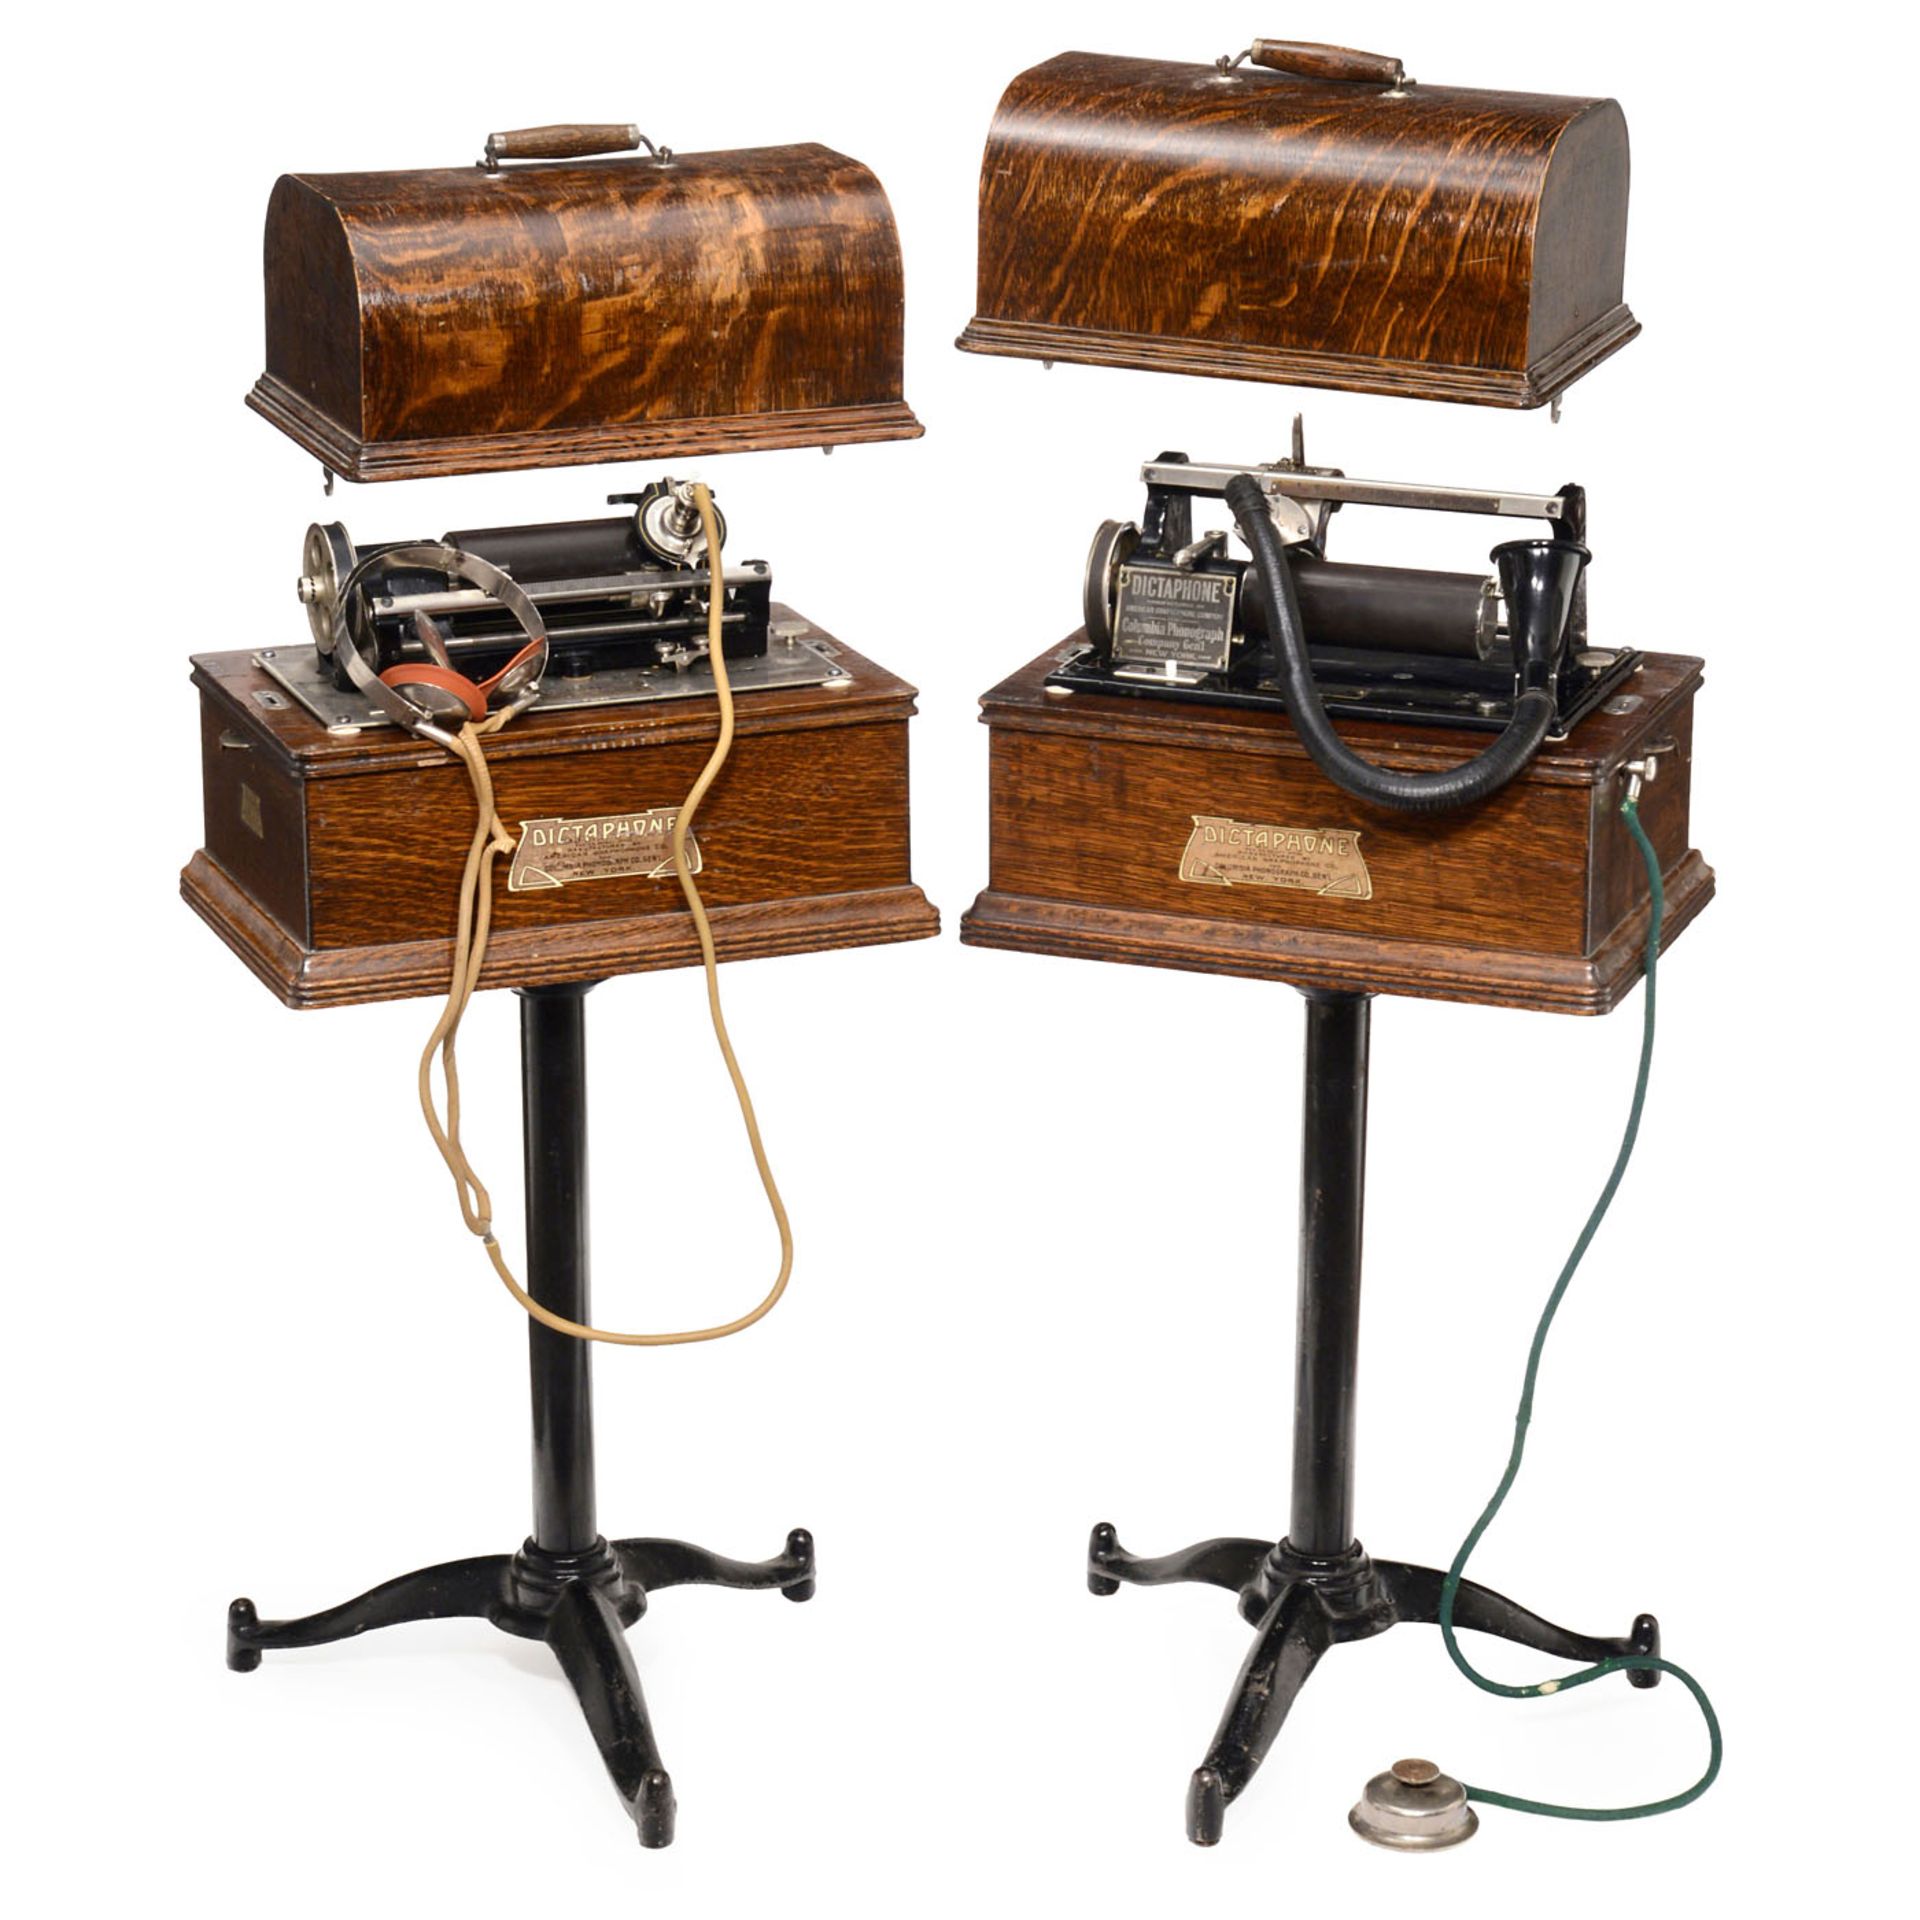 Complete Dictaphone Dictating System, c. 1915